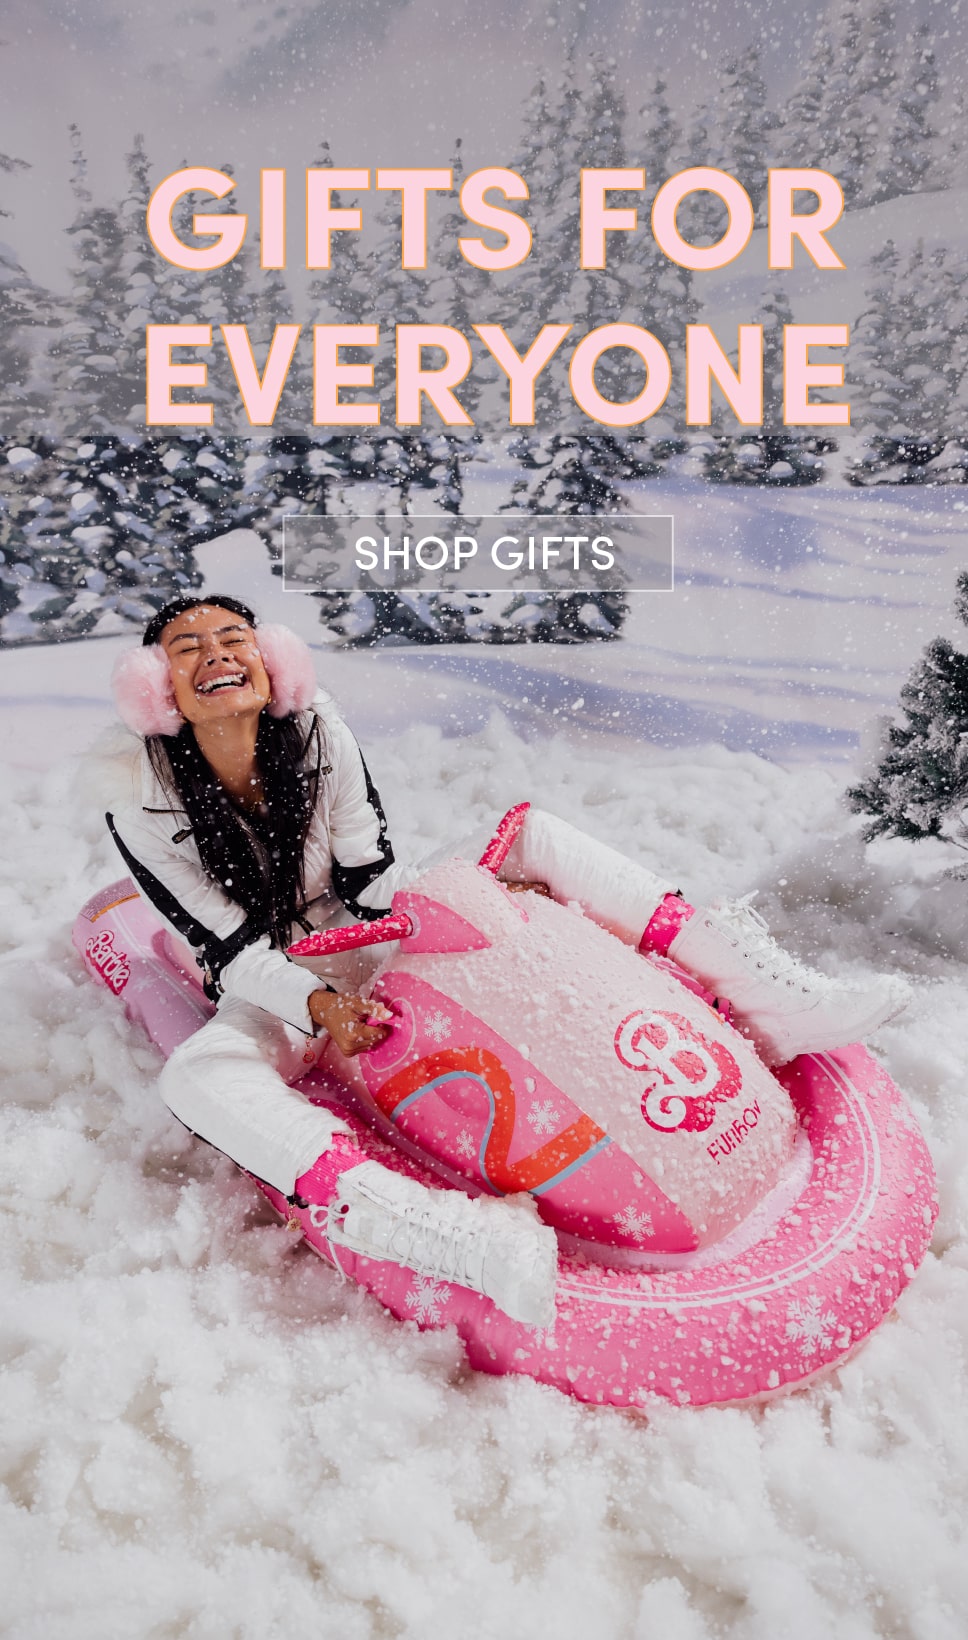 Gifts for everyone. Shop Gifts